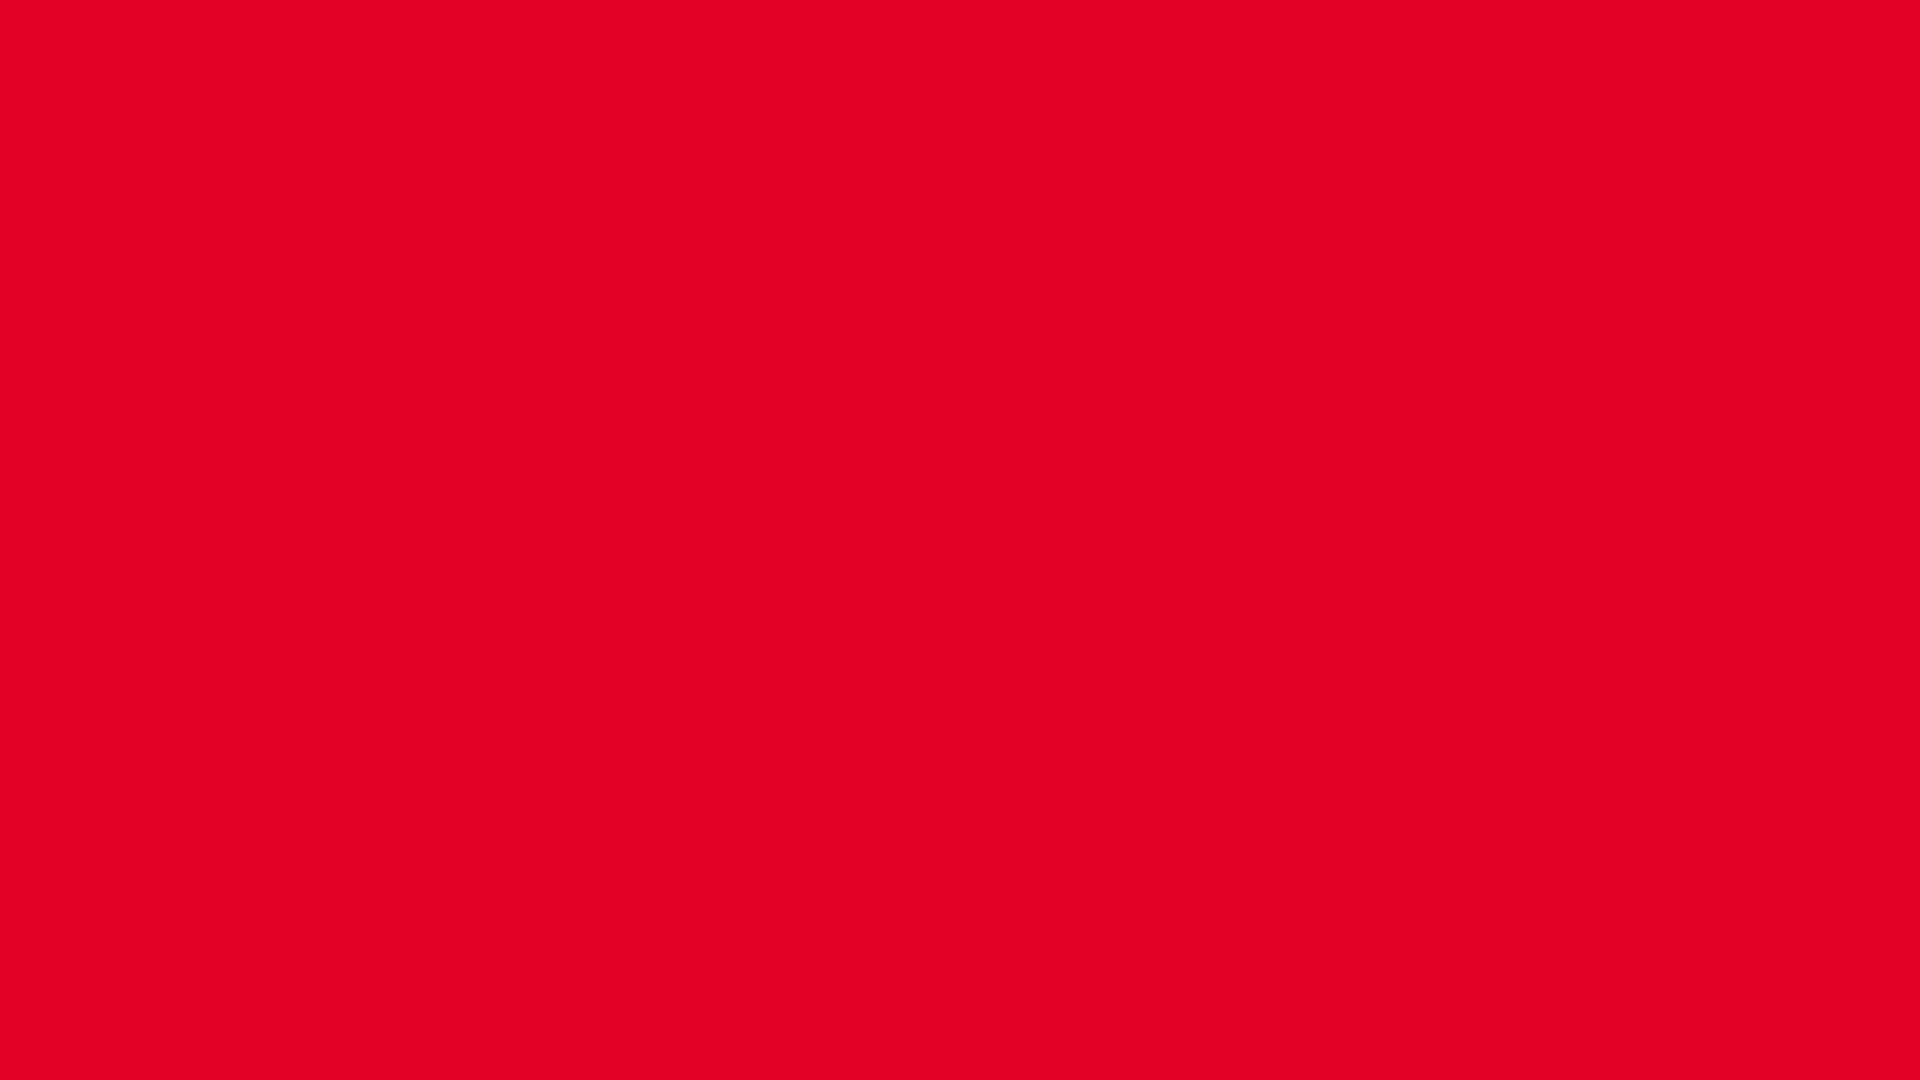 1920x1080 Cadmium Red Solid Color Background